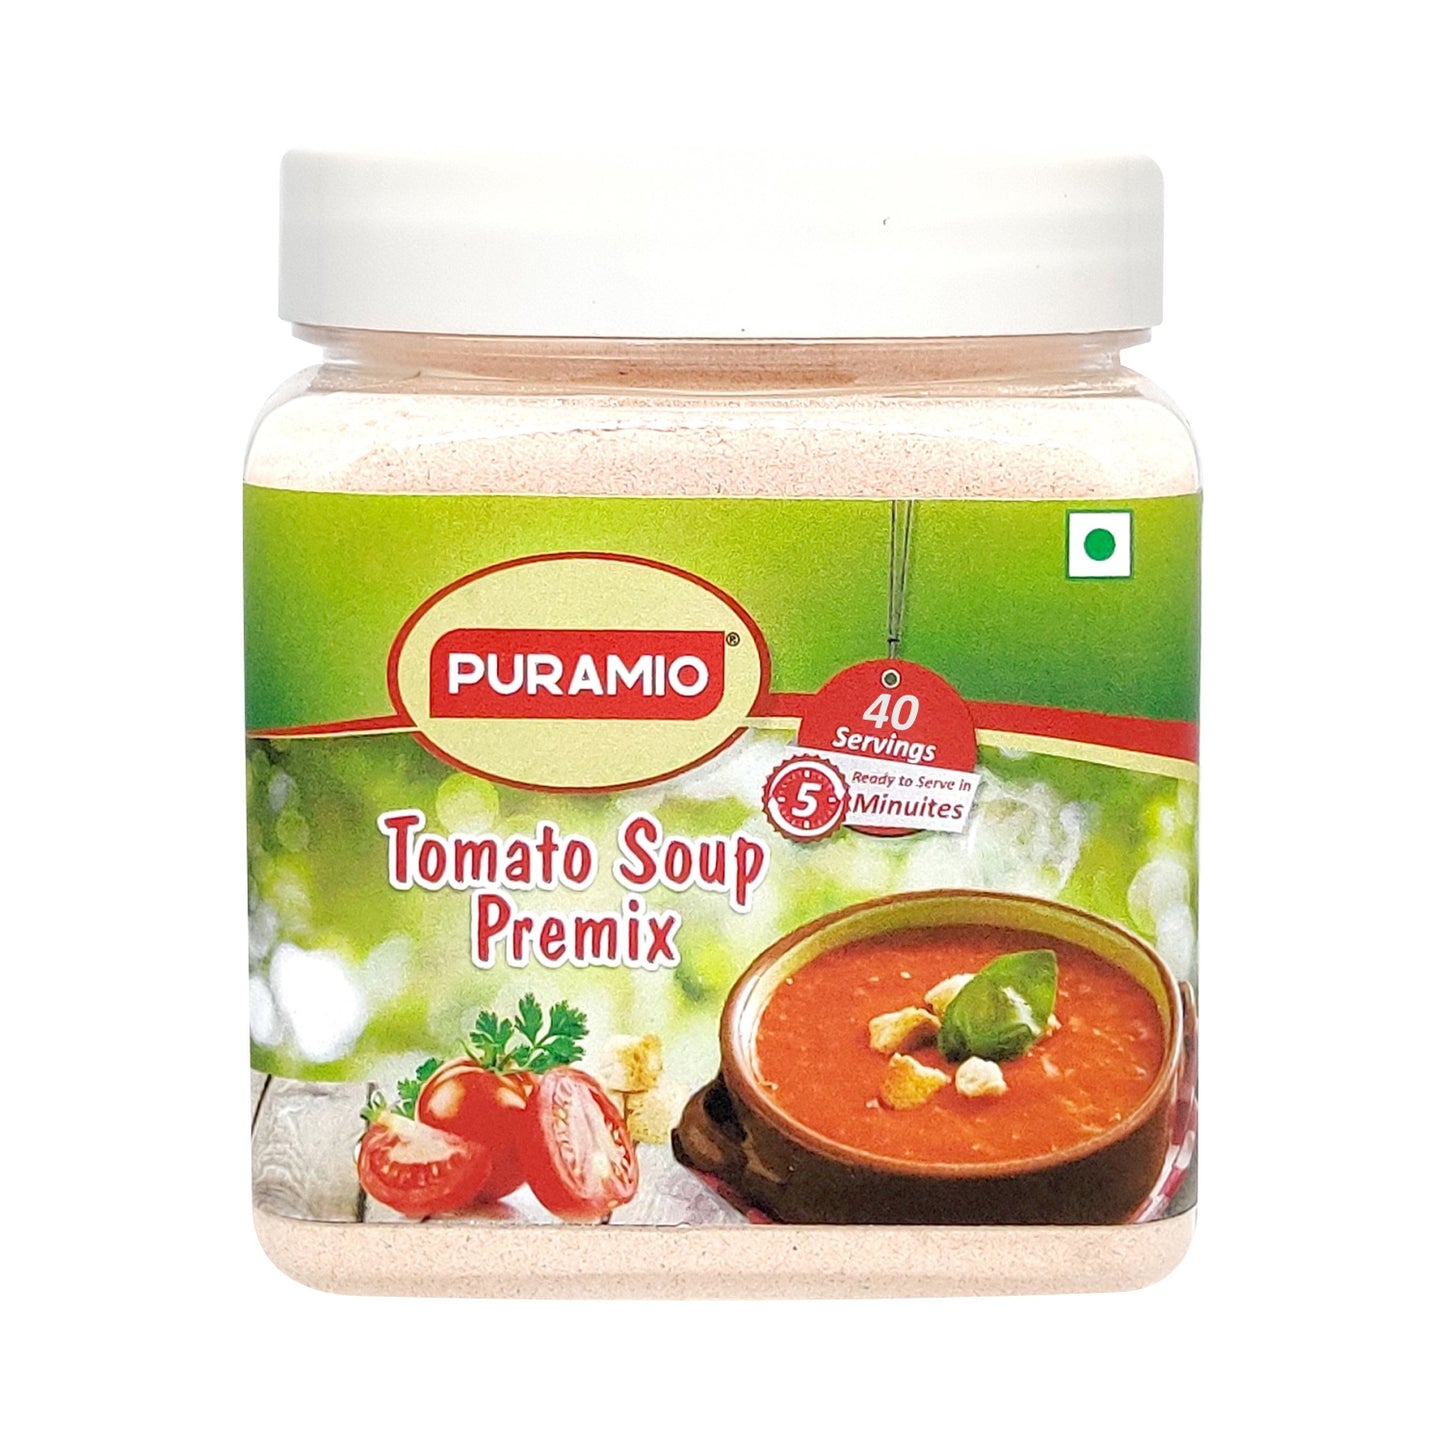 Puramio Instant Tomato Soup Premix [Natural Ingredients and No Artificial Colors Added]